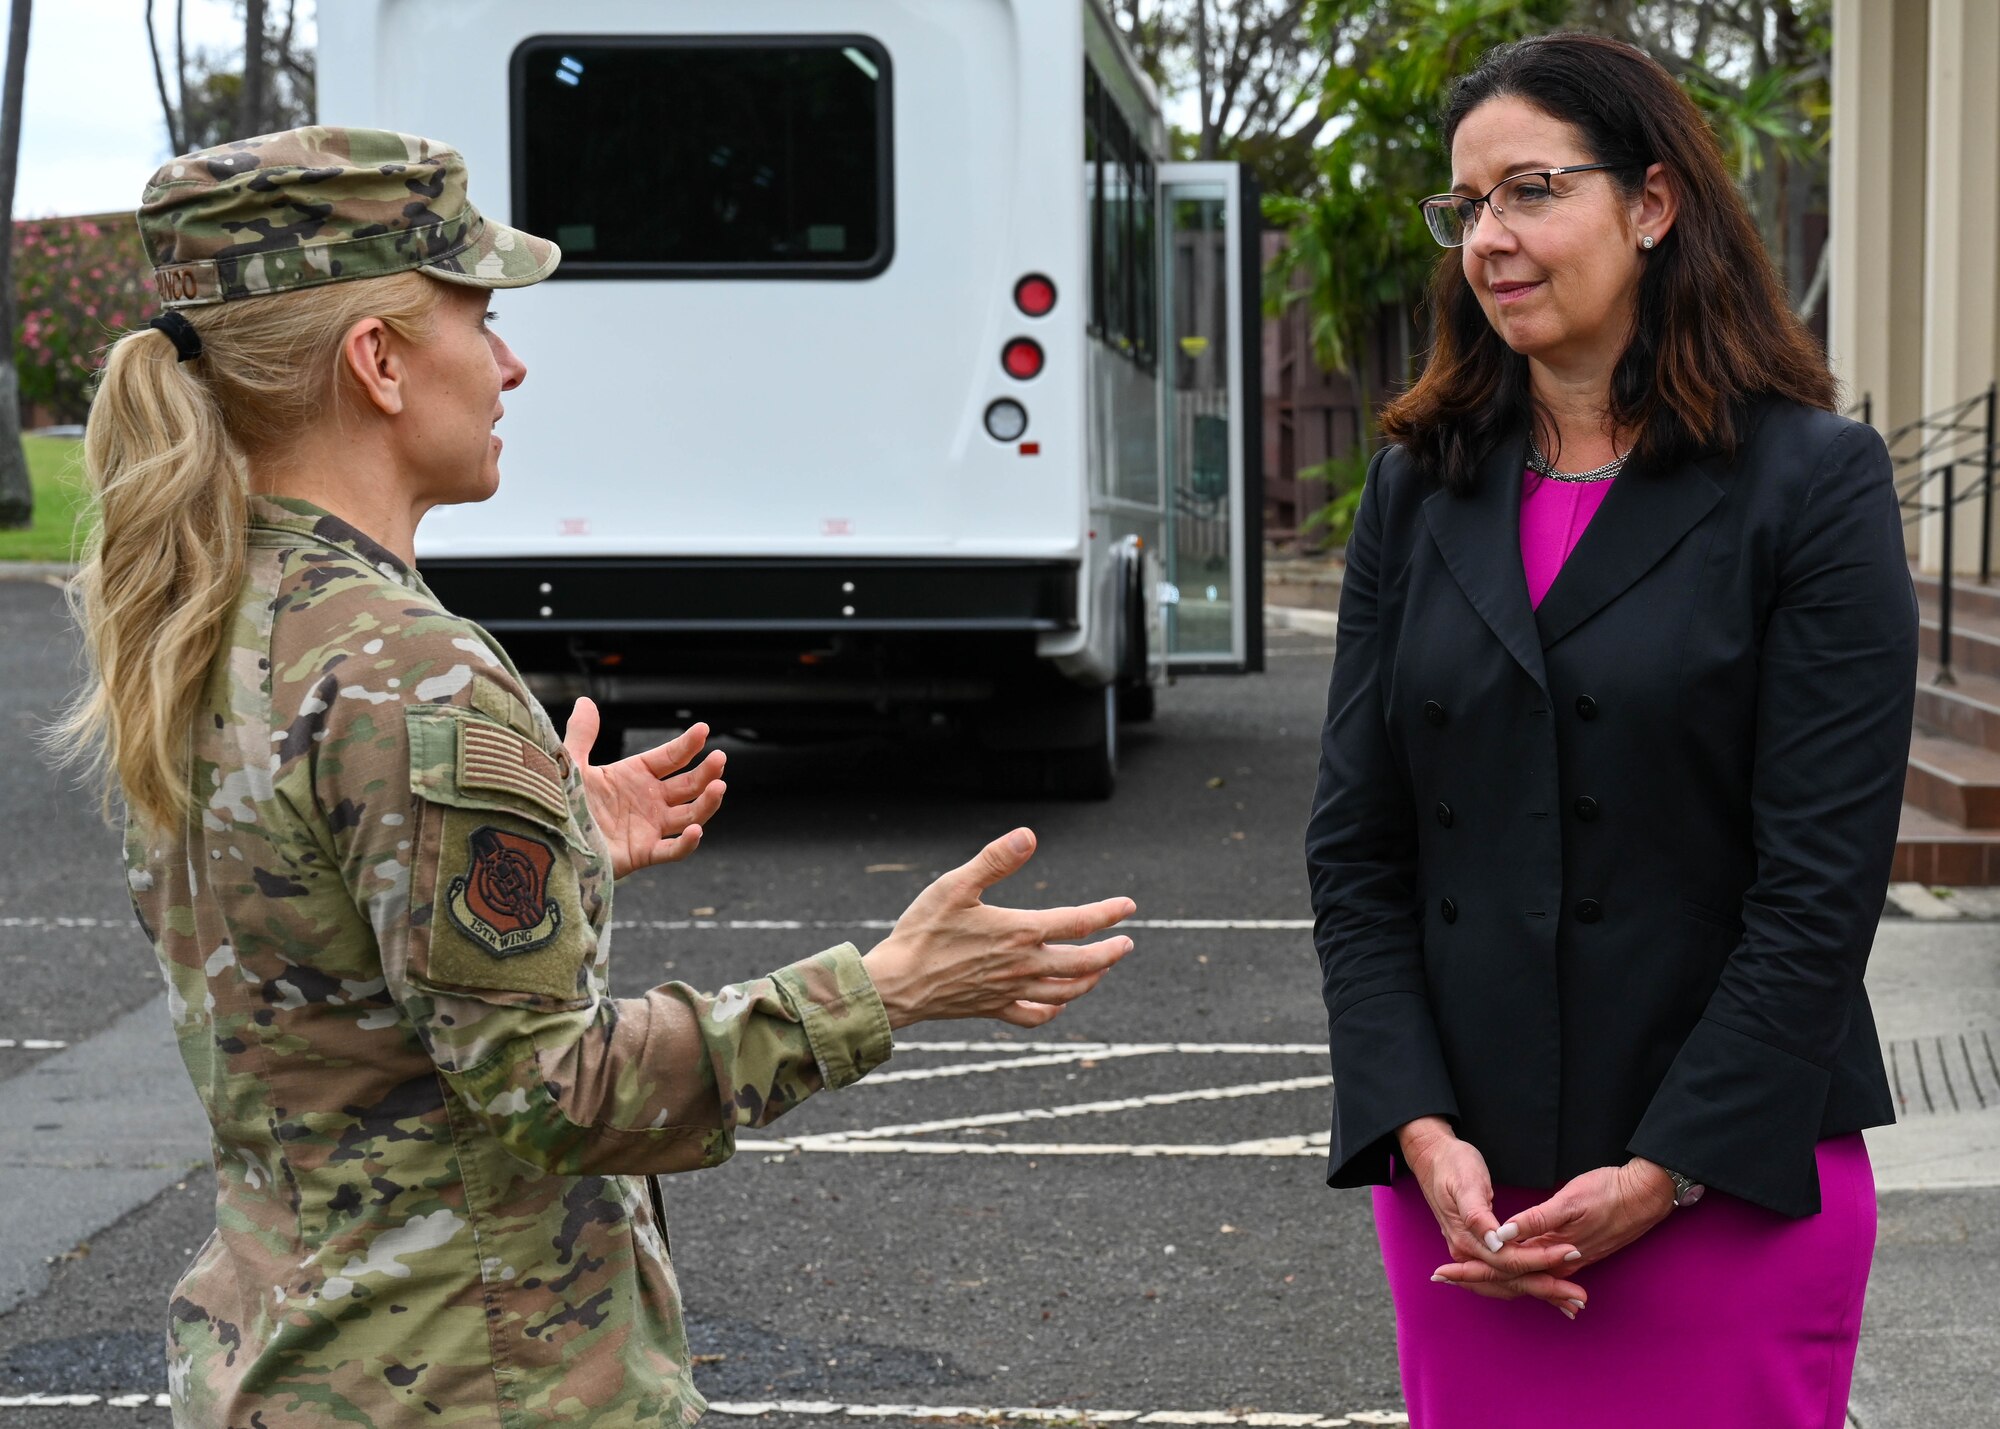 Col. Michele Lo Bianco, 15th Wing commander, converses with Kristyn Jones, assistant secretary of the Air Force for Financial Management and Comptroller, performing the duties of under secretary of the Air Force, during her visit to Joint Base Pearl Harbor-Hickam, Hawaii, May 2, 2023. Lo Bianco and Jones exchanged views on pressing topics regarding the installation and airmen and their families. (U.S. Air Force photo by Senior Airman Zoie Cox)